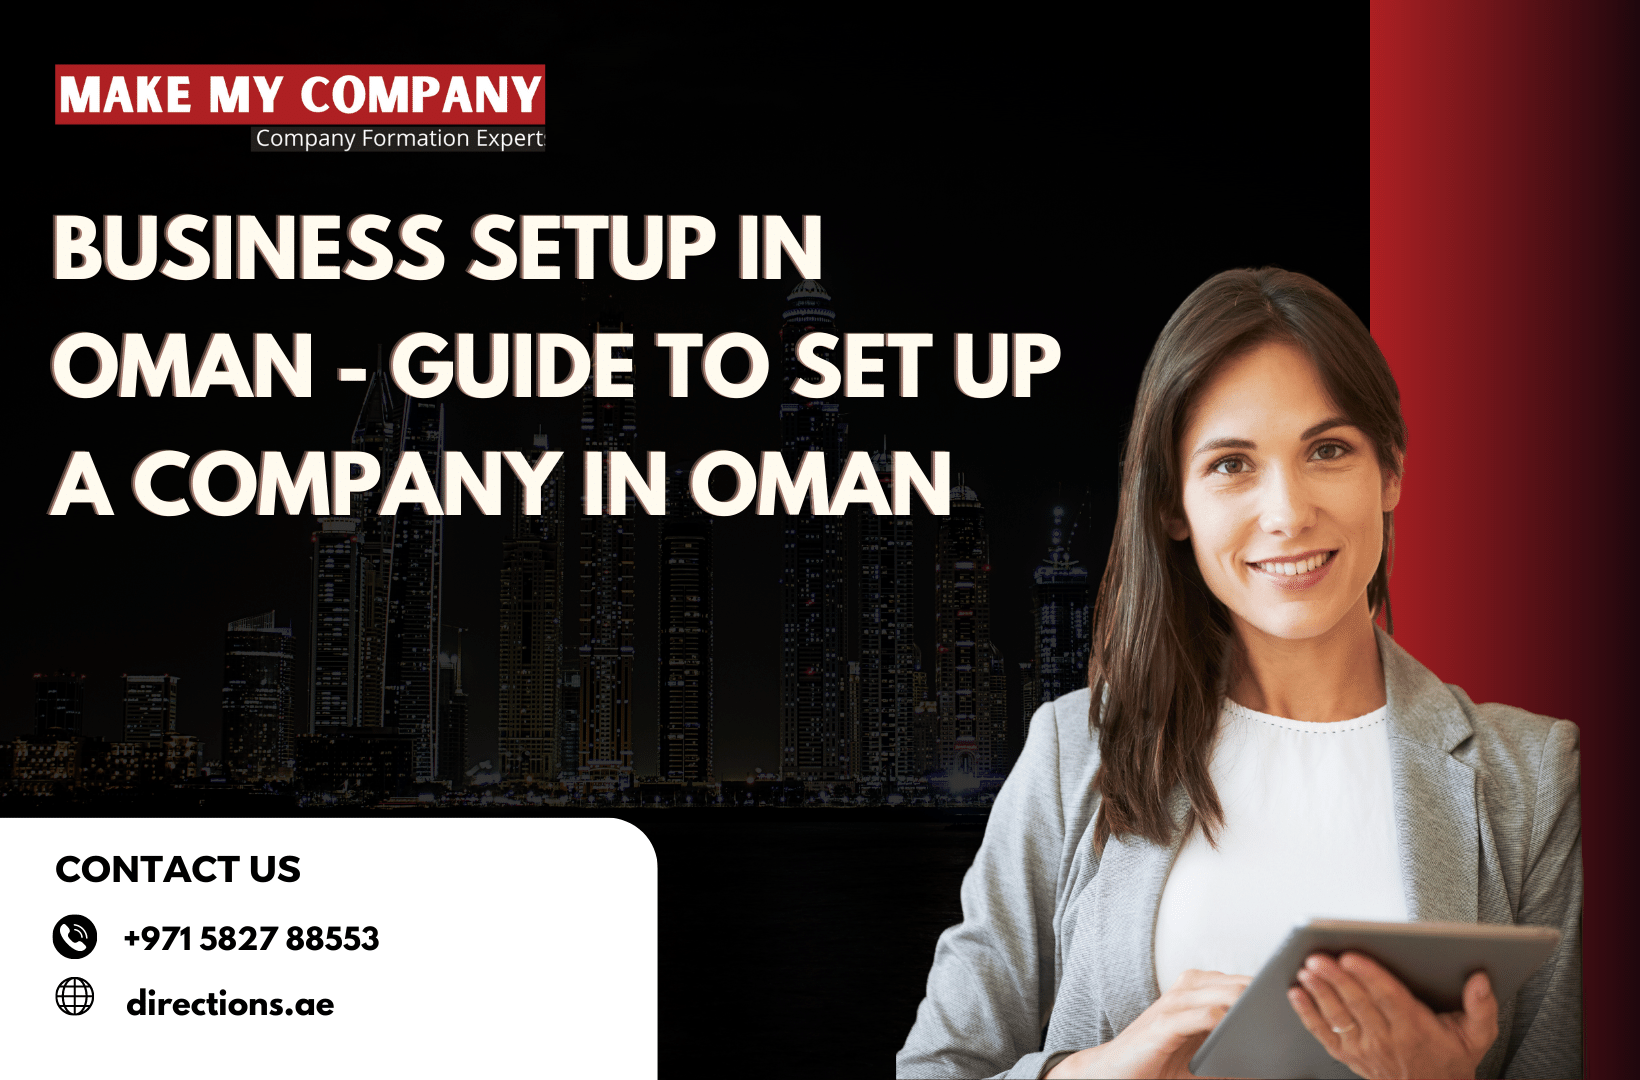 Business Setup in Oman - Guide to Set up a company in Oman